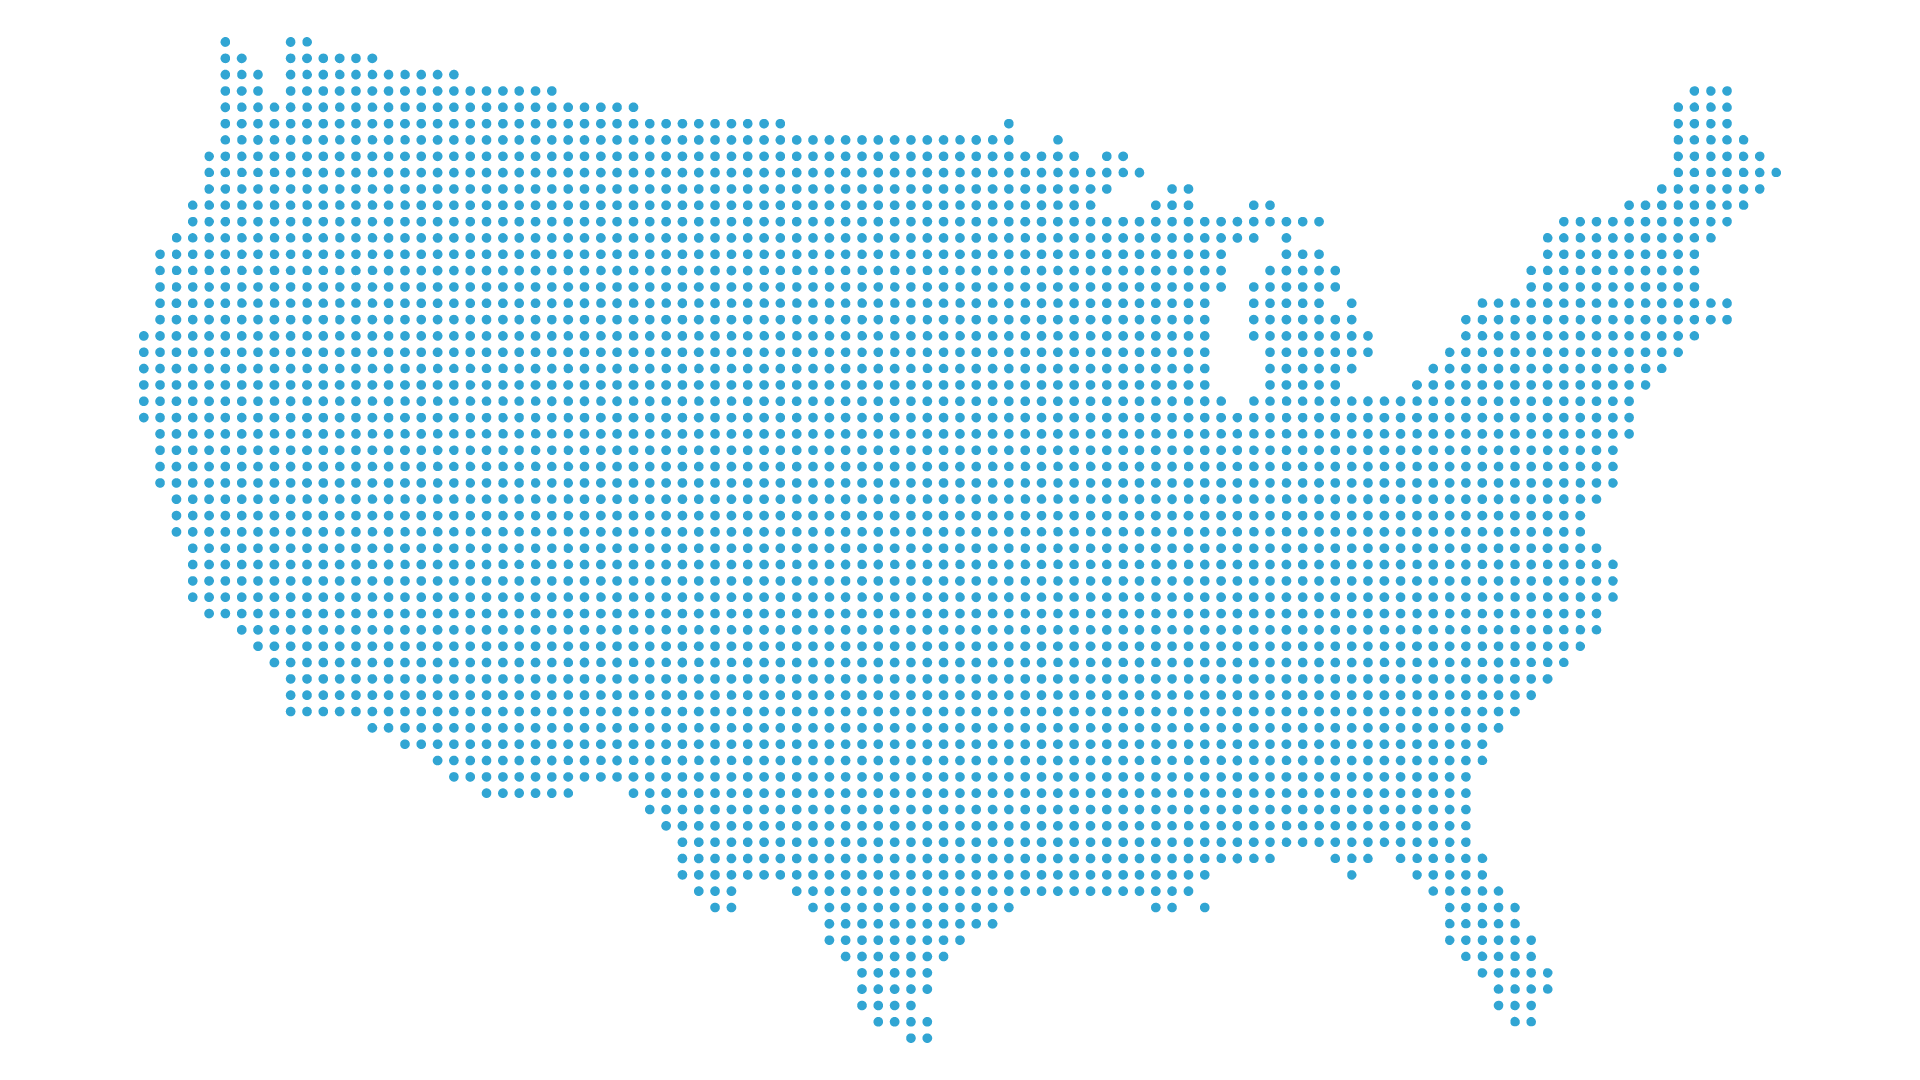 Map of the United States showing major cities, represented with dots, superimposed on a blue background with a grid pattern.